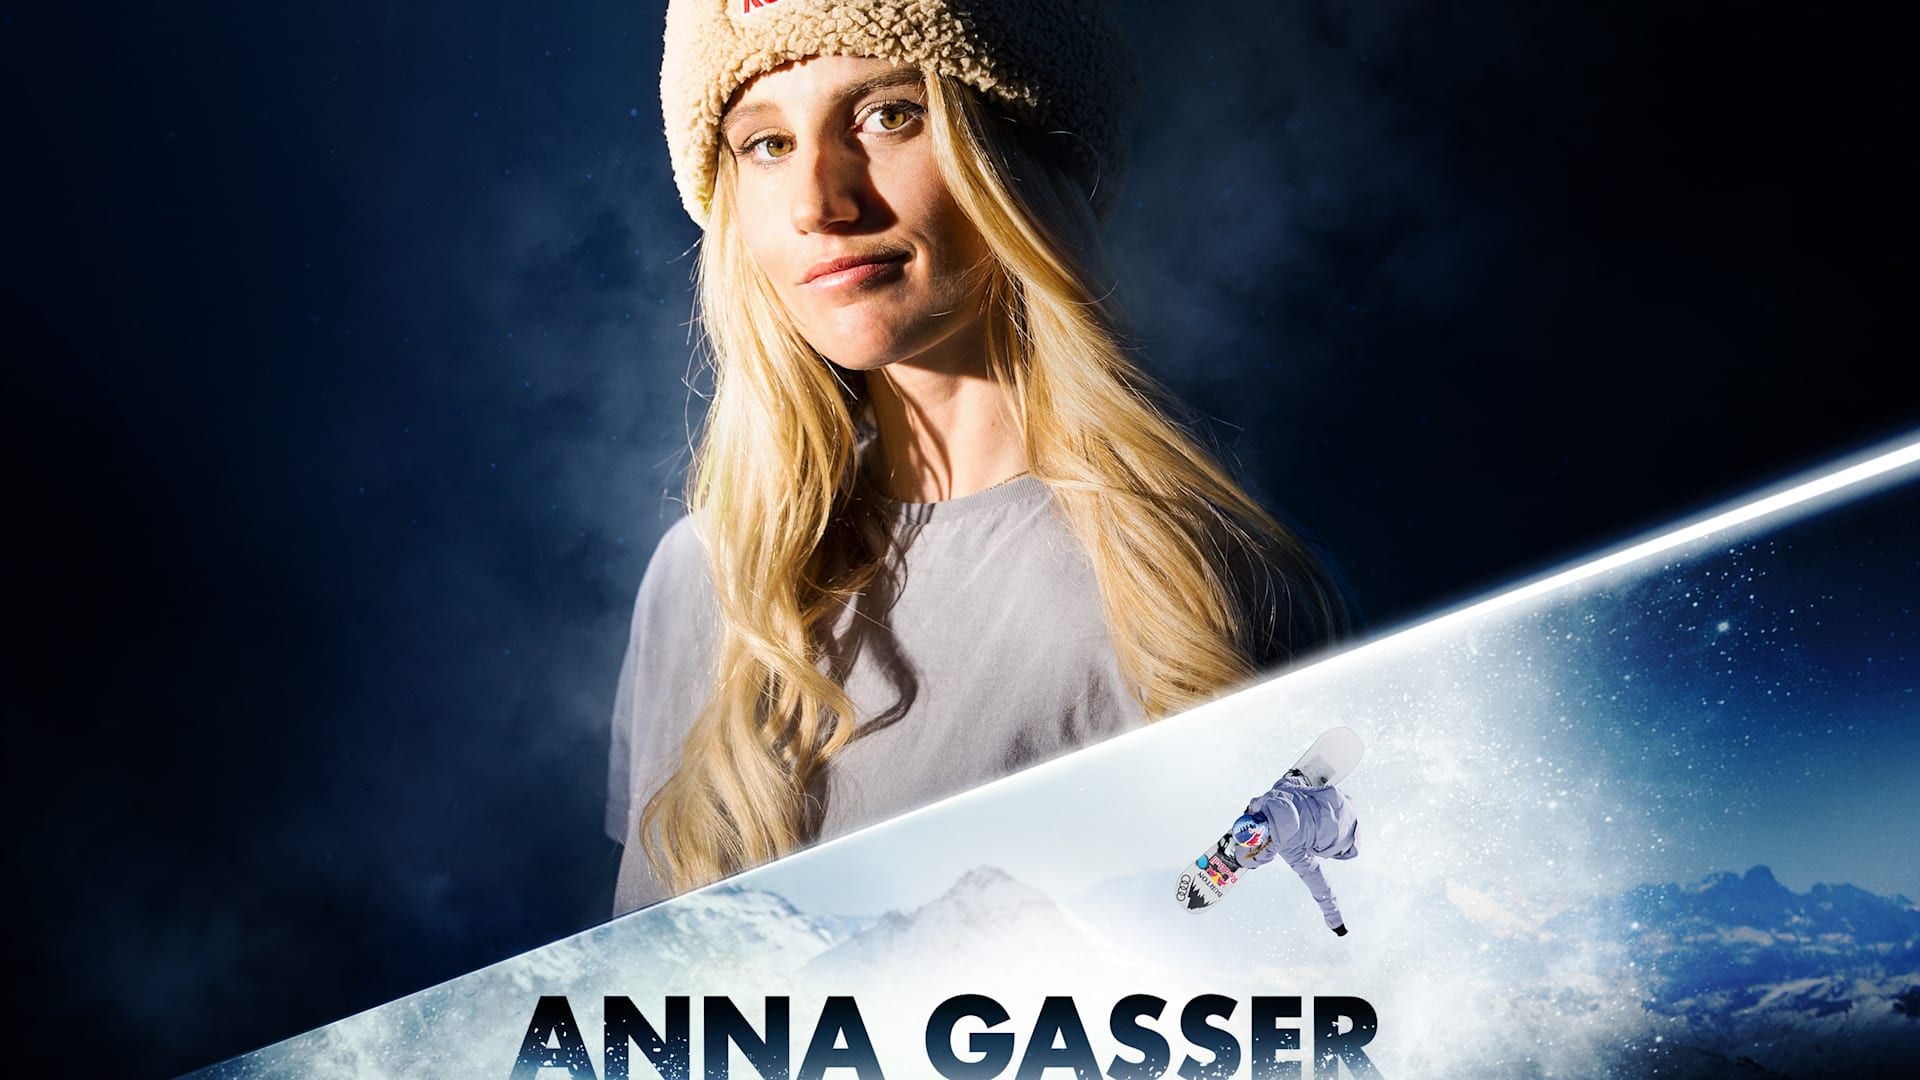 Anna Gasser – The Spark Within